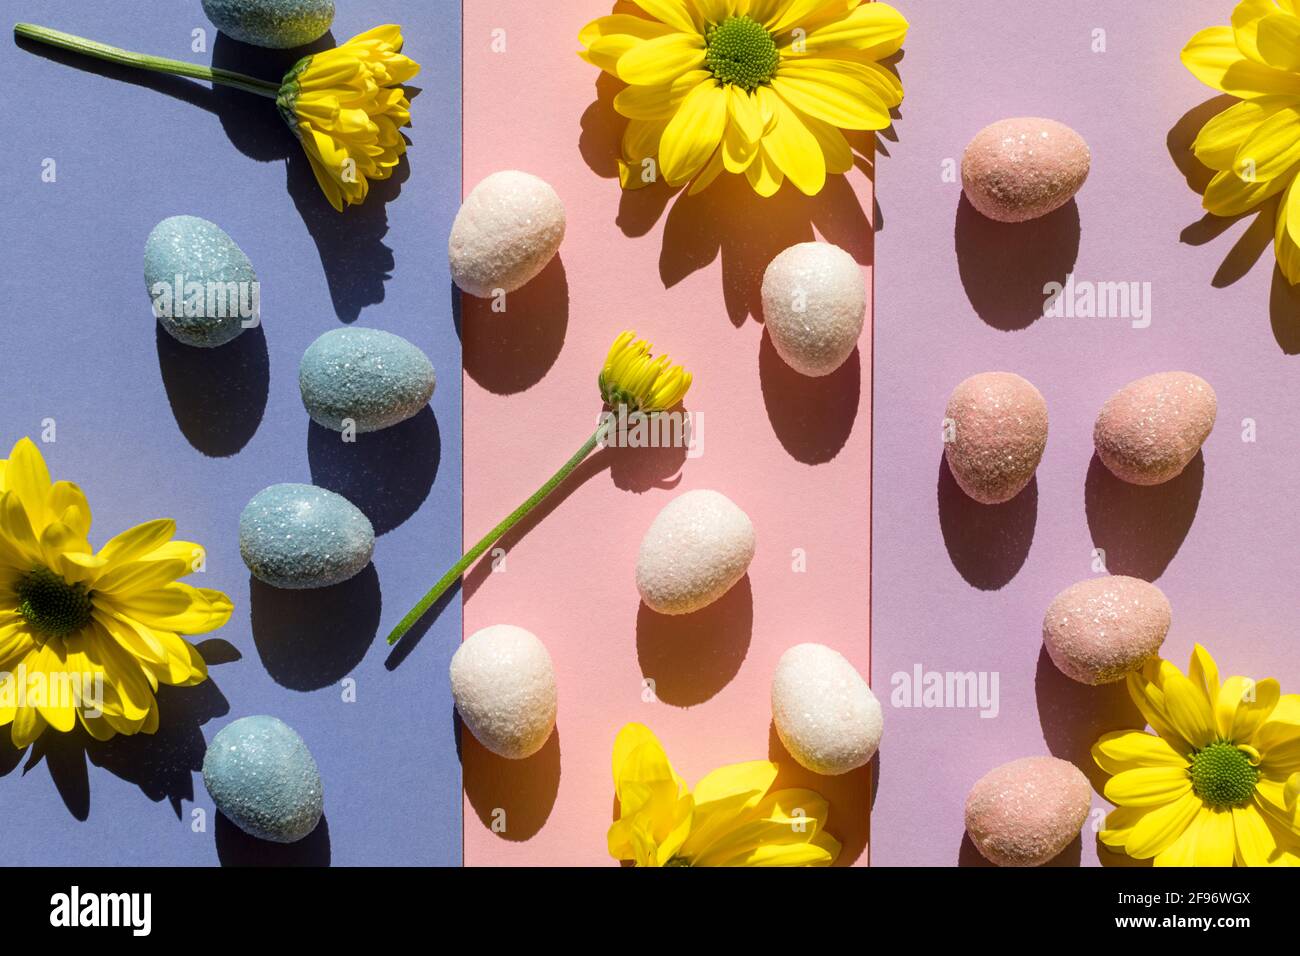 Abstract Easter layout with eggs and yellow flowers with trend summer shadows on colorful background. Minimal spring holiday concept. Flat lay. Stock Photo